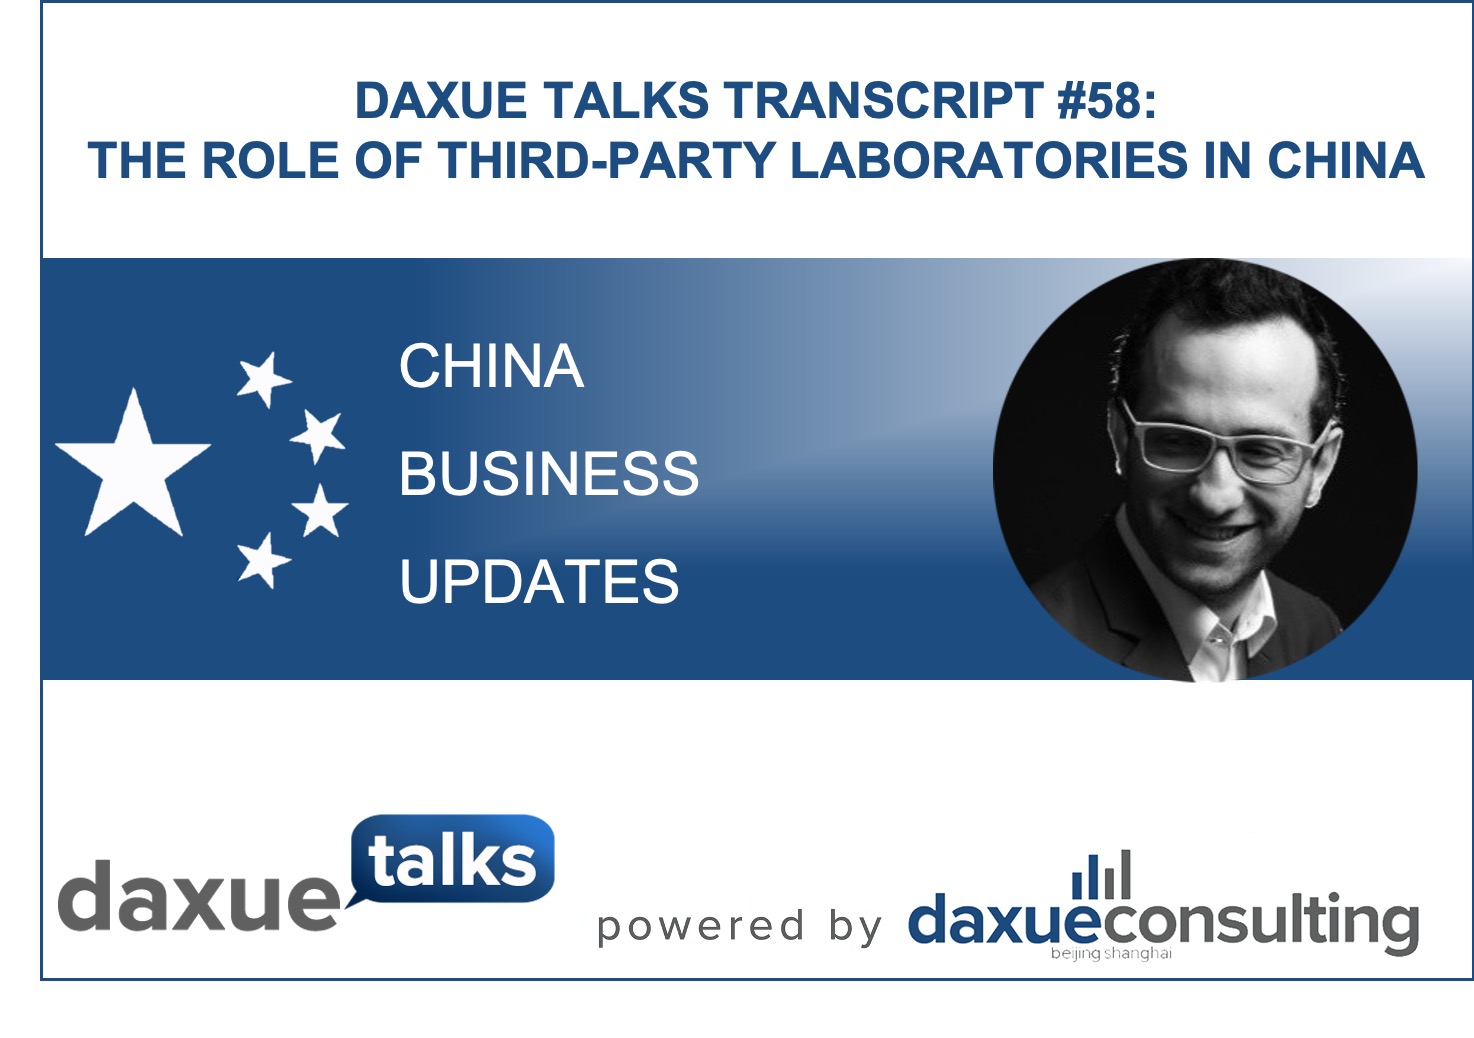 Daxue Talks transcript #58: The role of third-party laboratories in China